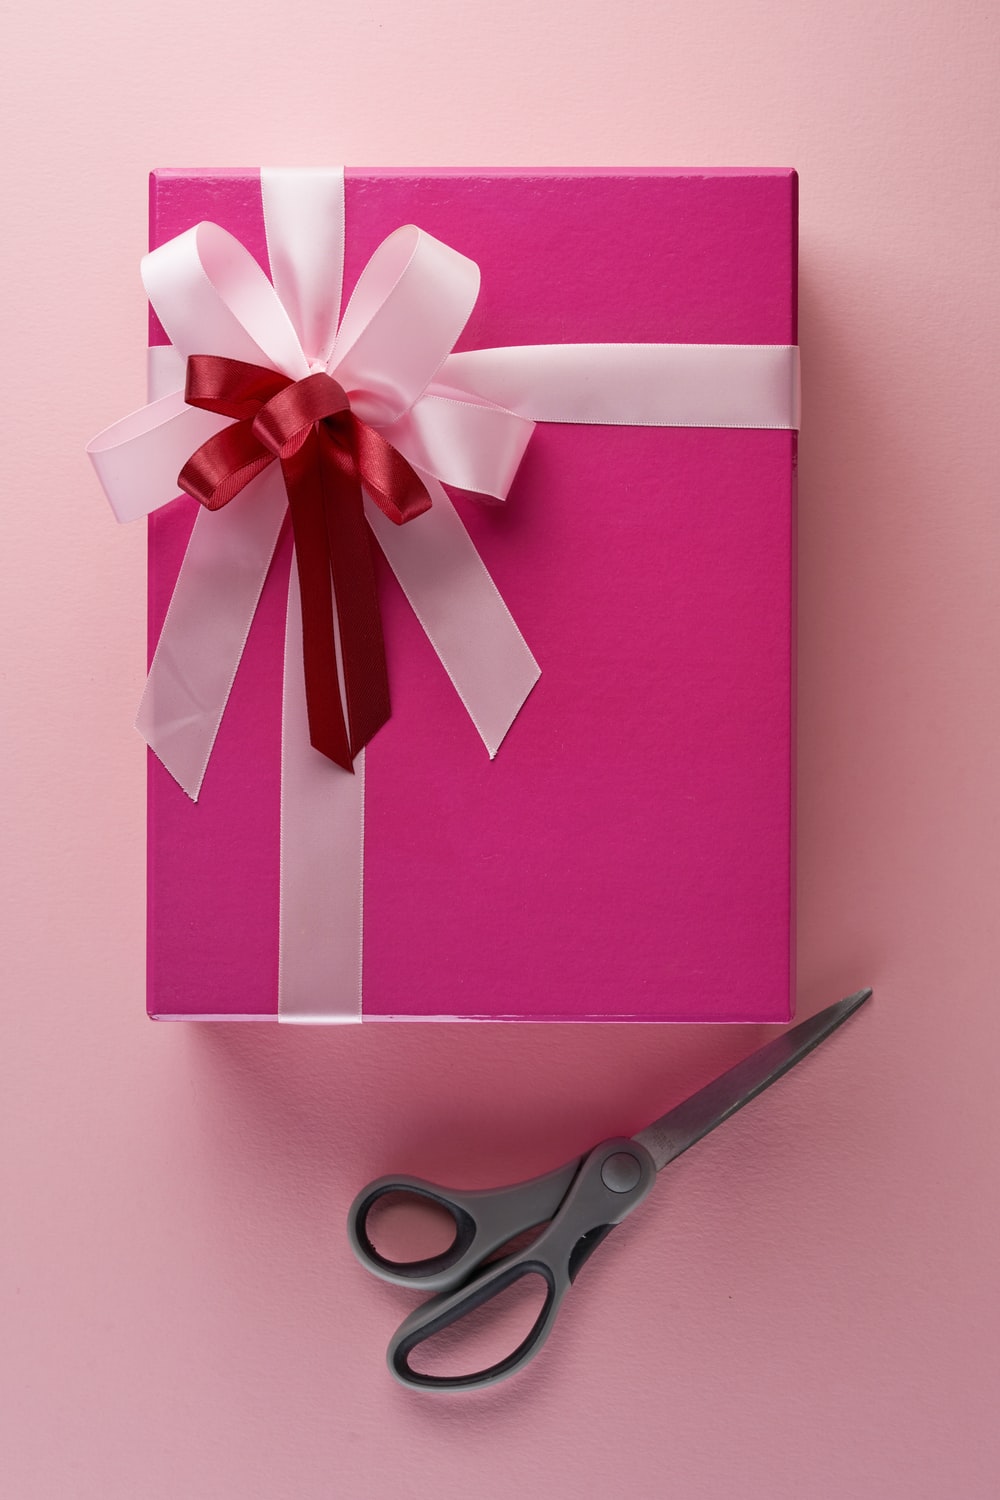 Gift Box Picture. Download Free Image